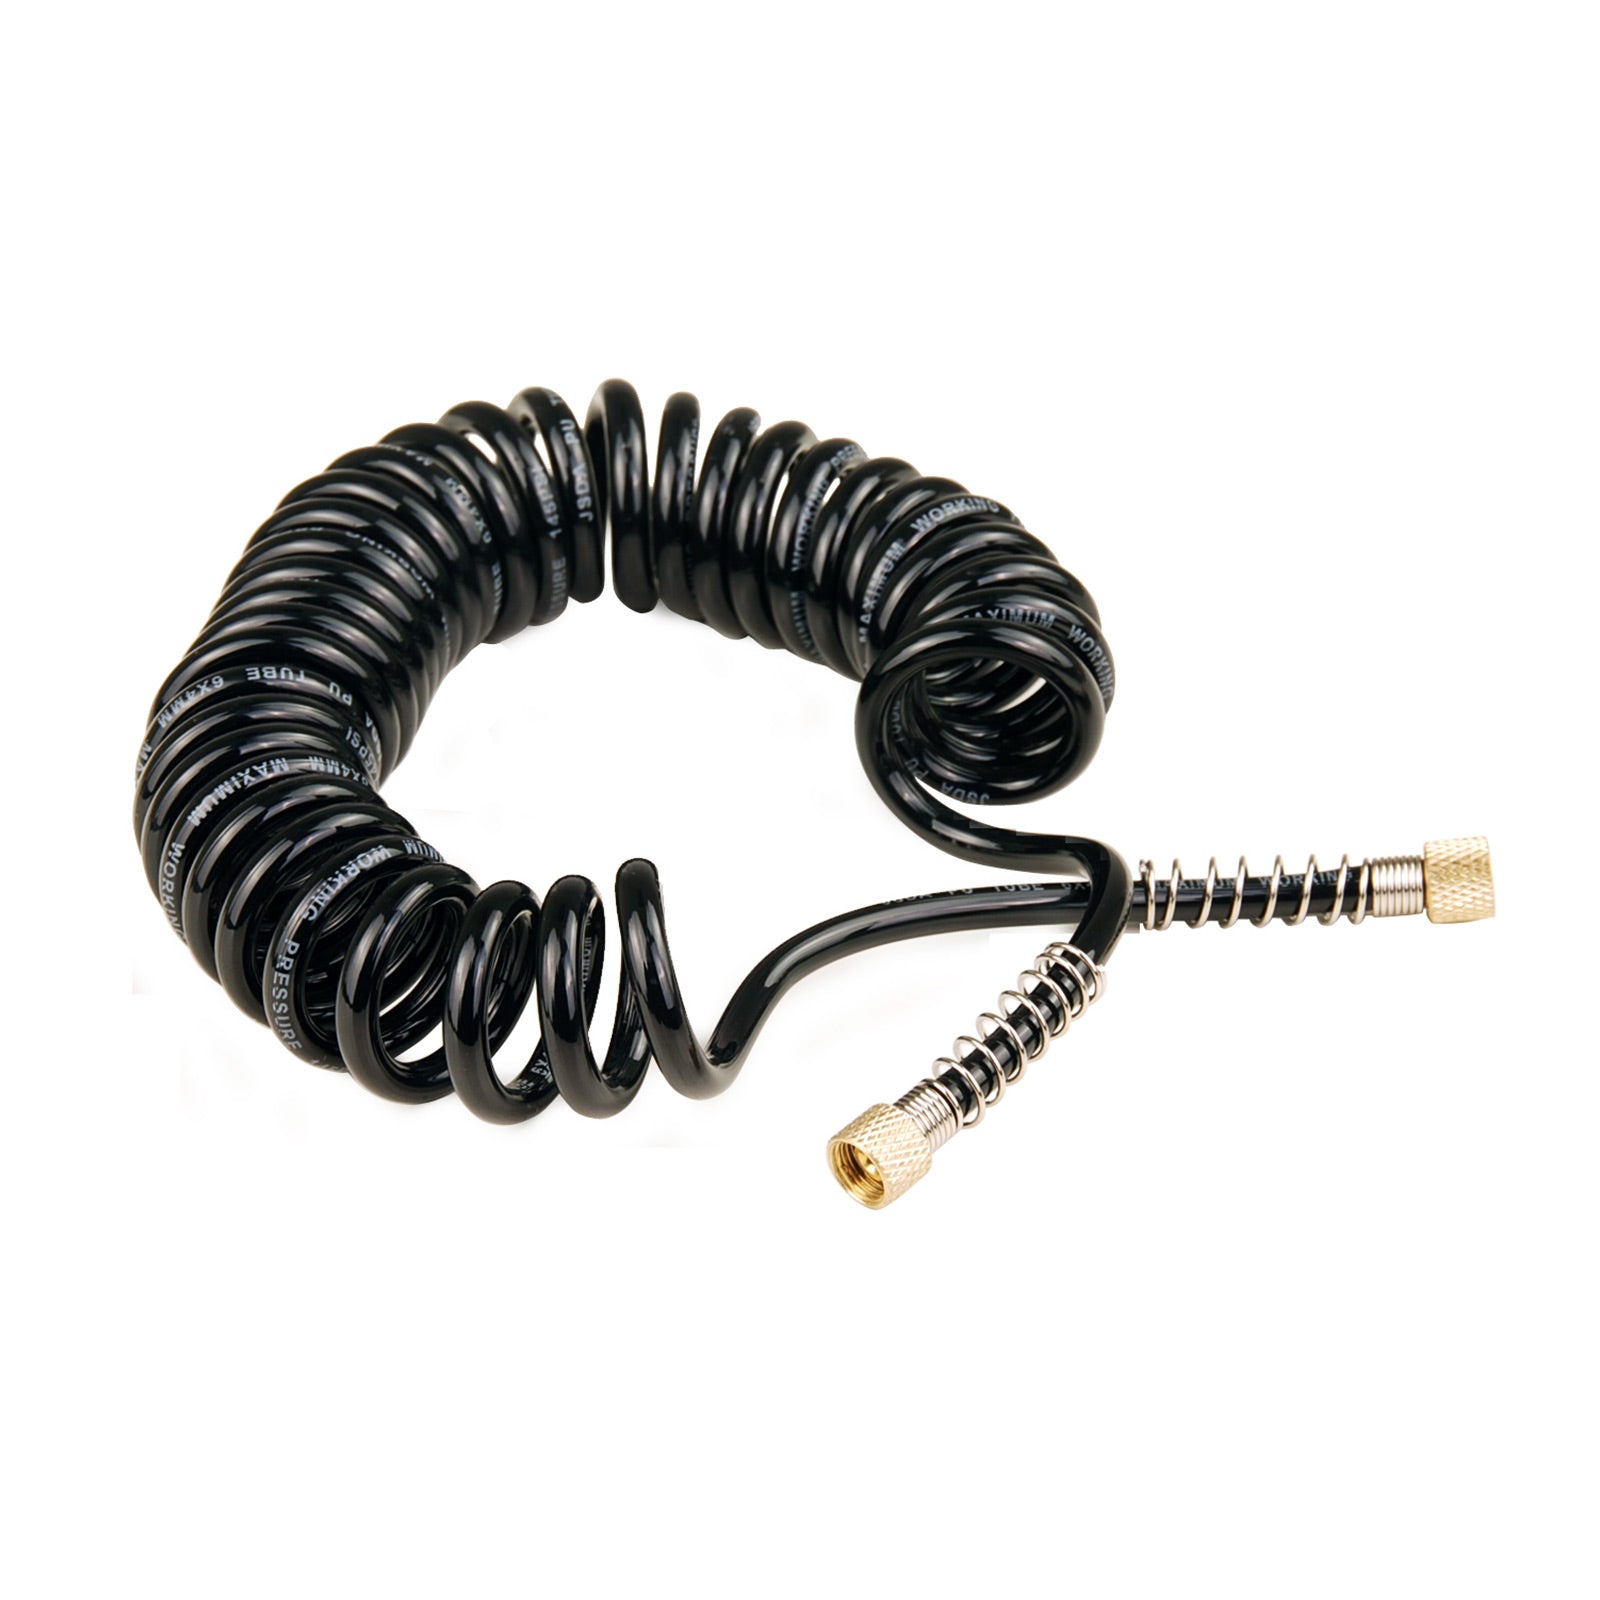 Dynamic Power 2 Set Air Brush Hose Coiled Retractable Compressor 1/8in 3M - SILBERSHELL